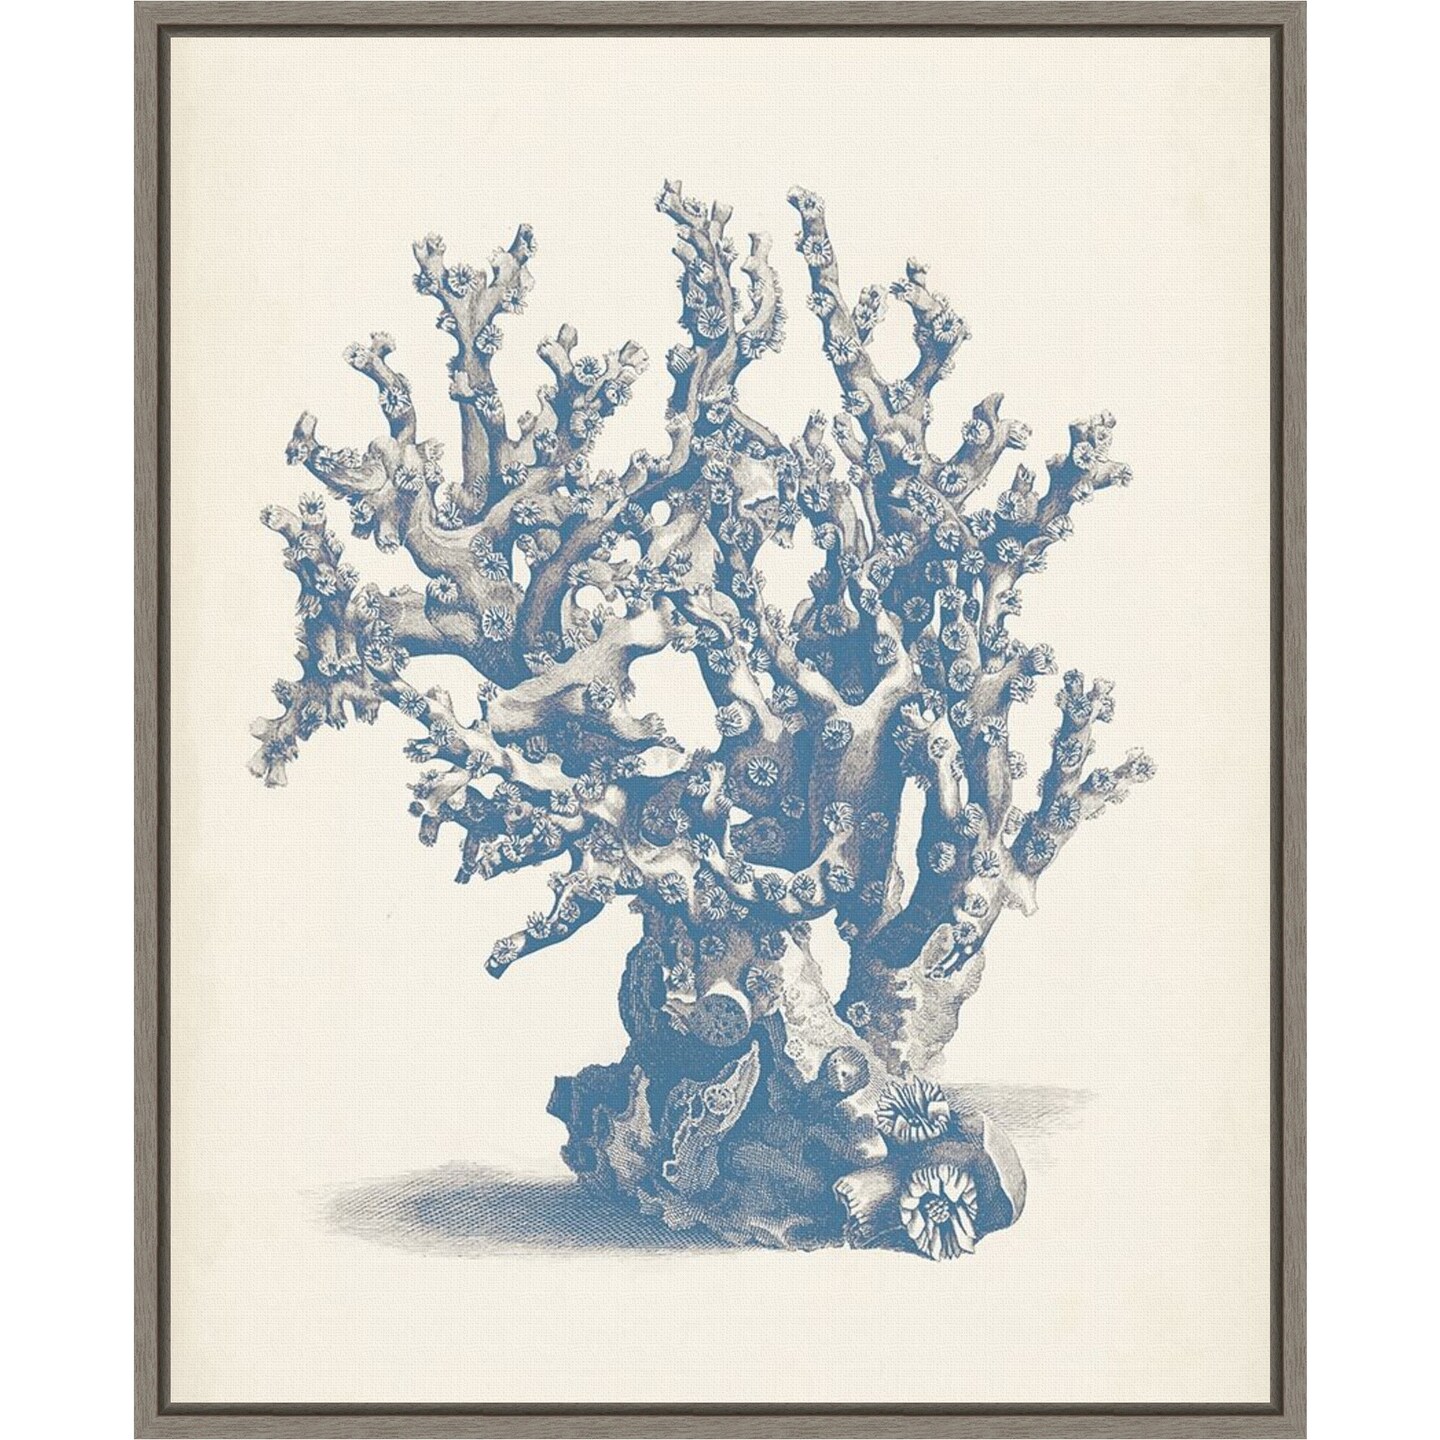 Antique Coral Collection V by Vision Studio 16-in. W x 20-in. H. Canvas Wall Art Print Framed in Grey